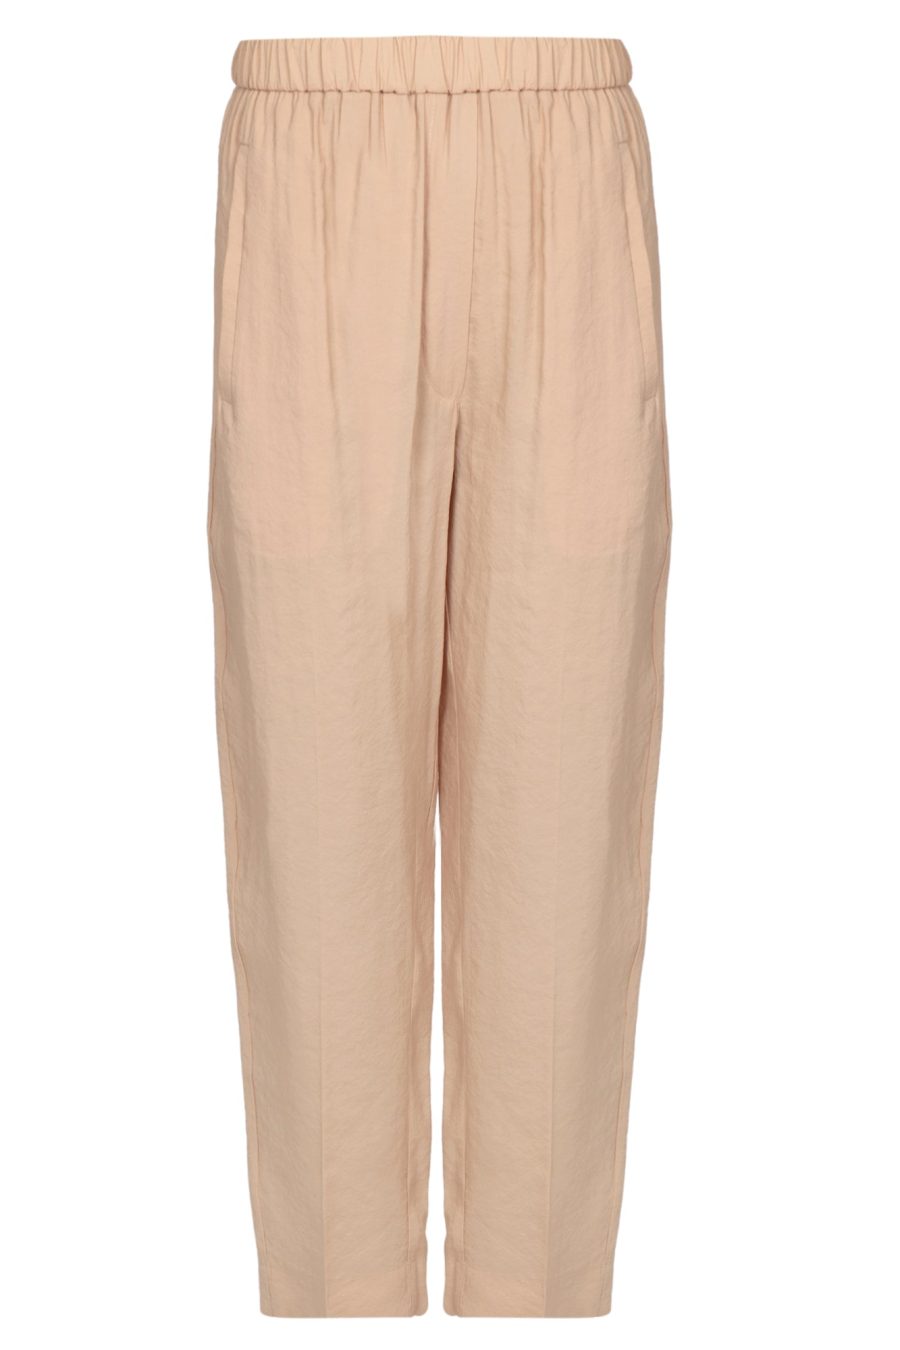 Canvas - Trousers - 430862 - Natural